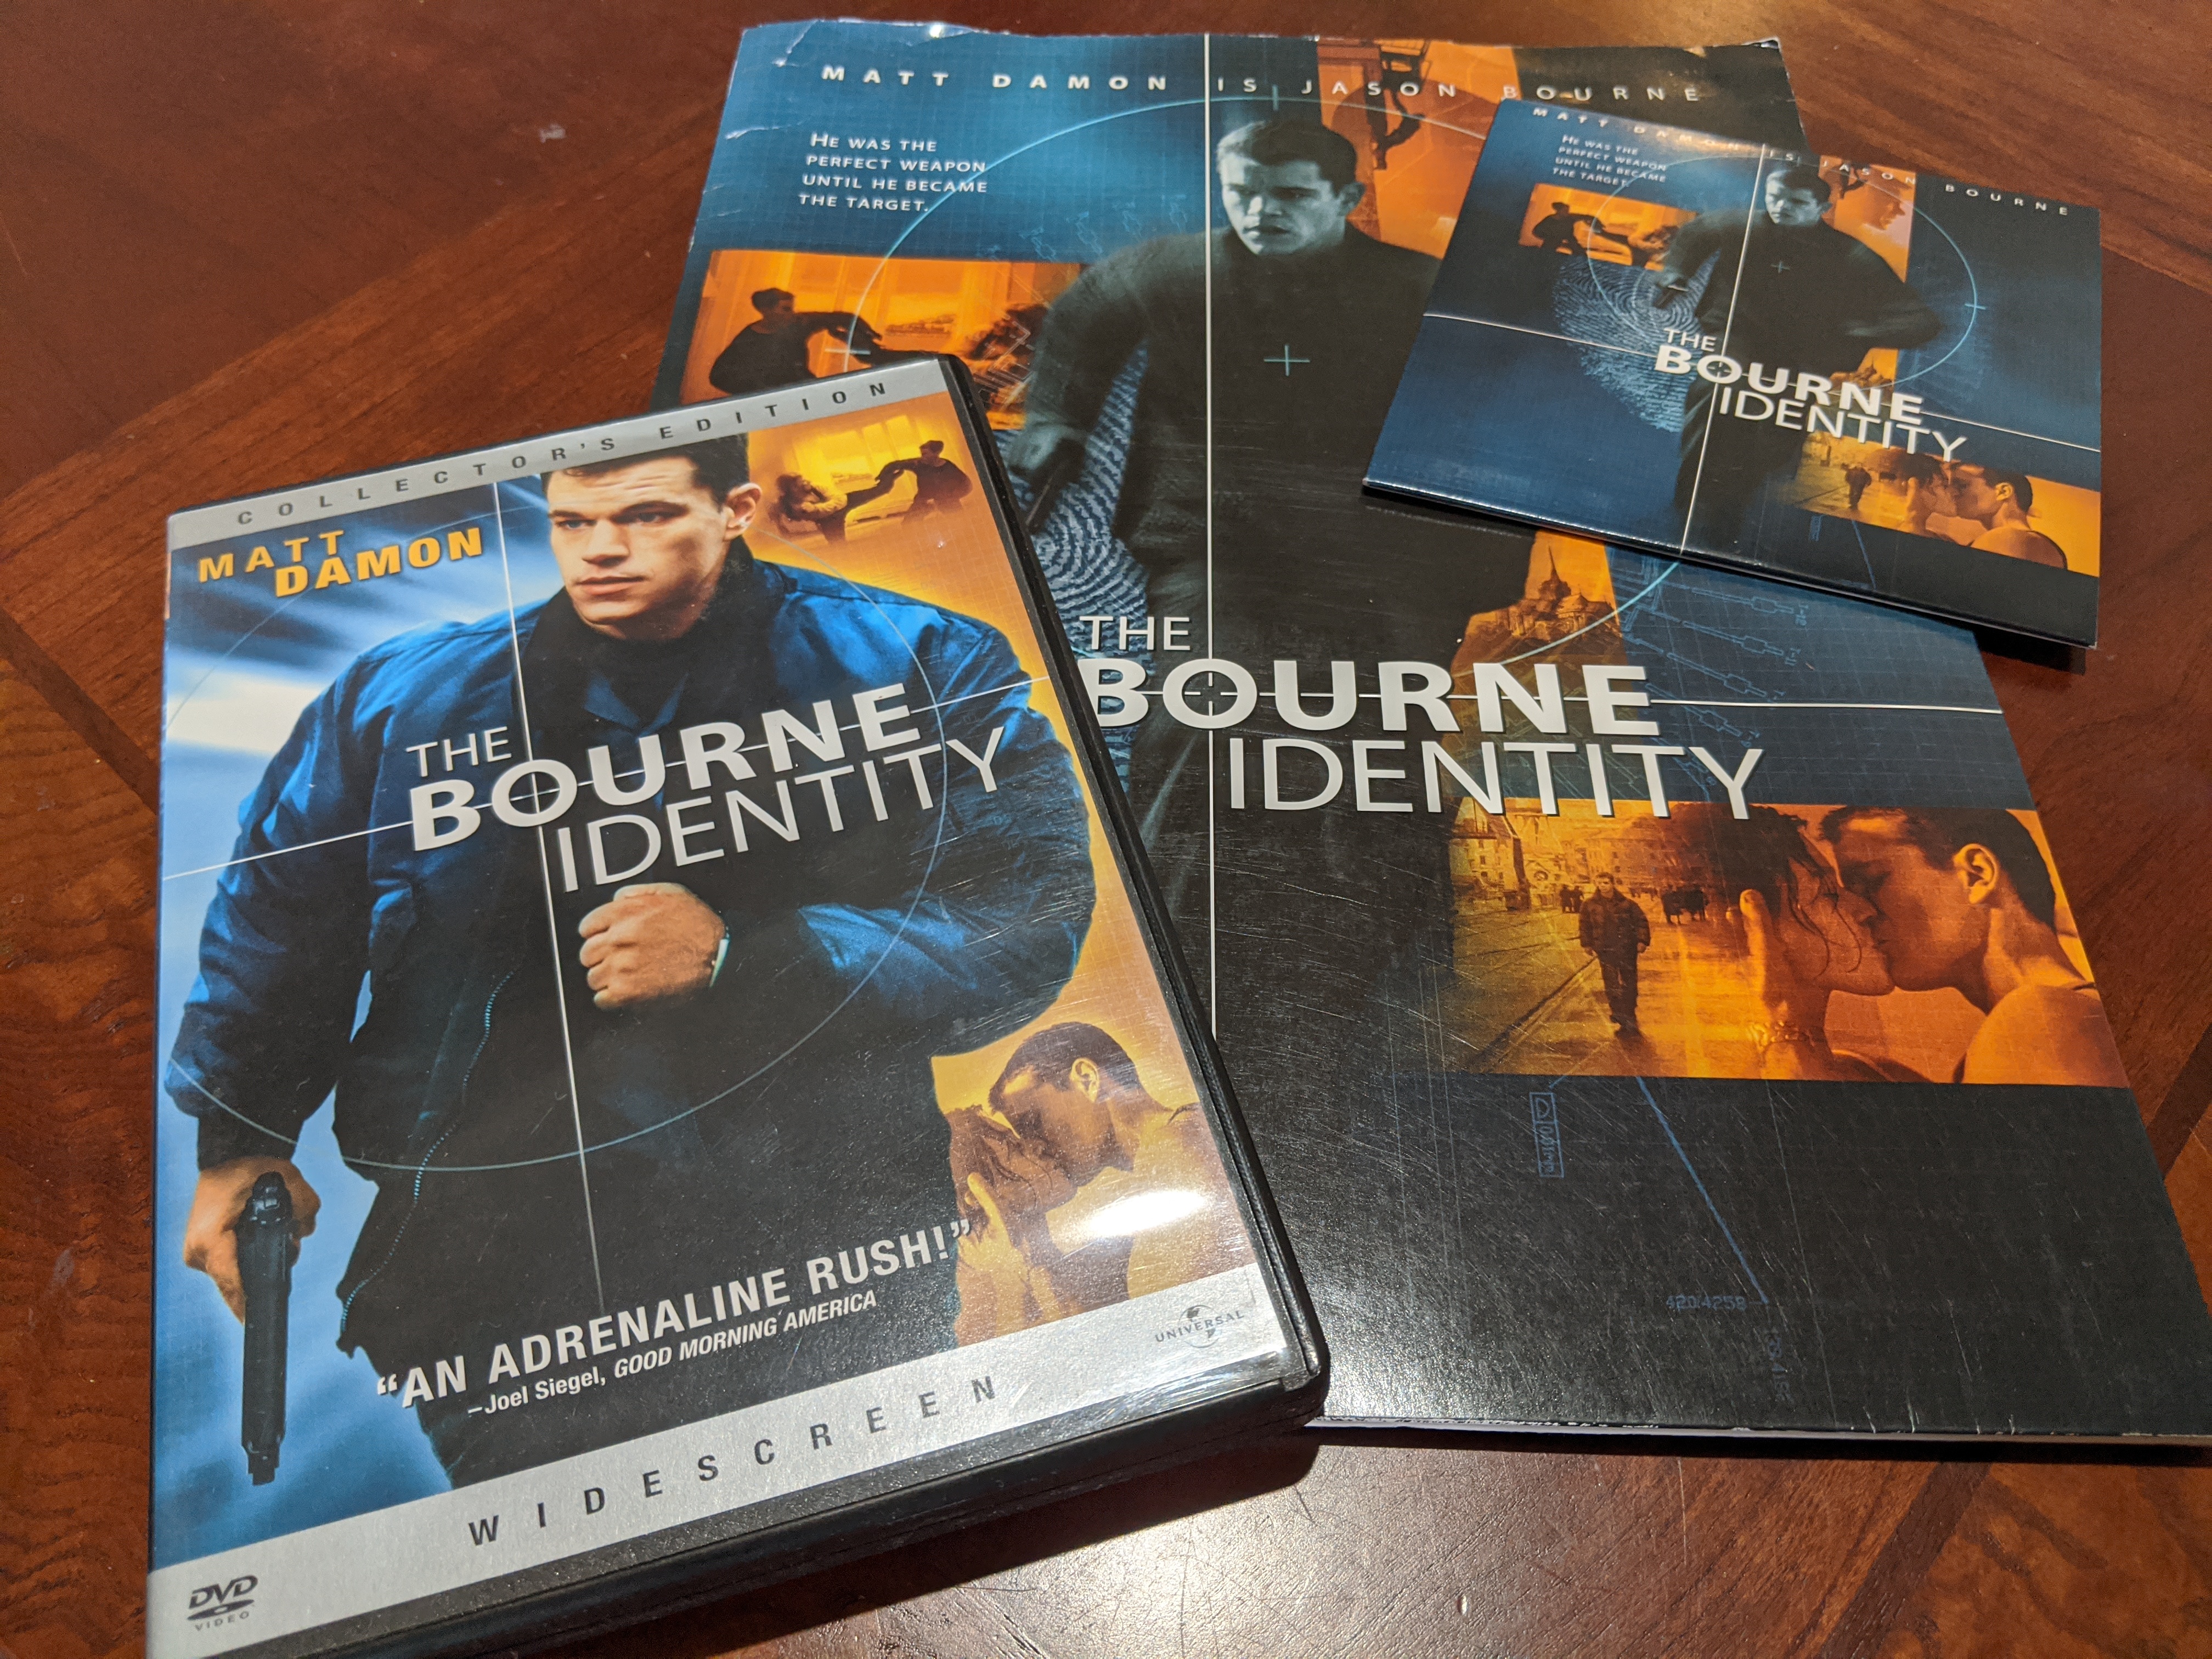 Photo of The Bourne Identity DVD next to a folder/CD that comprise a media press kit for reviewers.